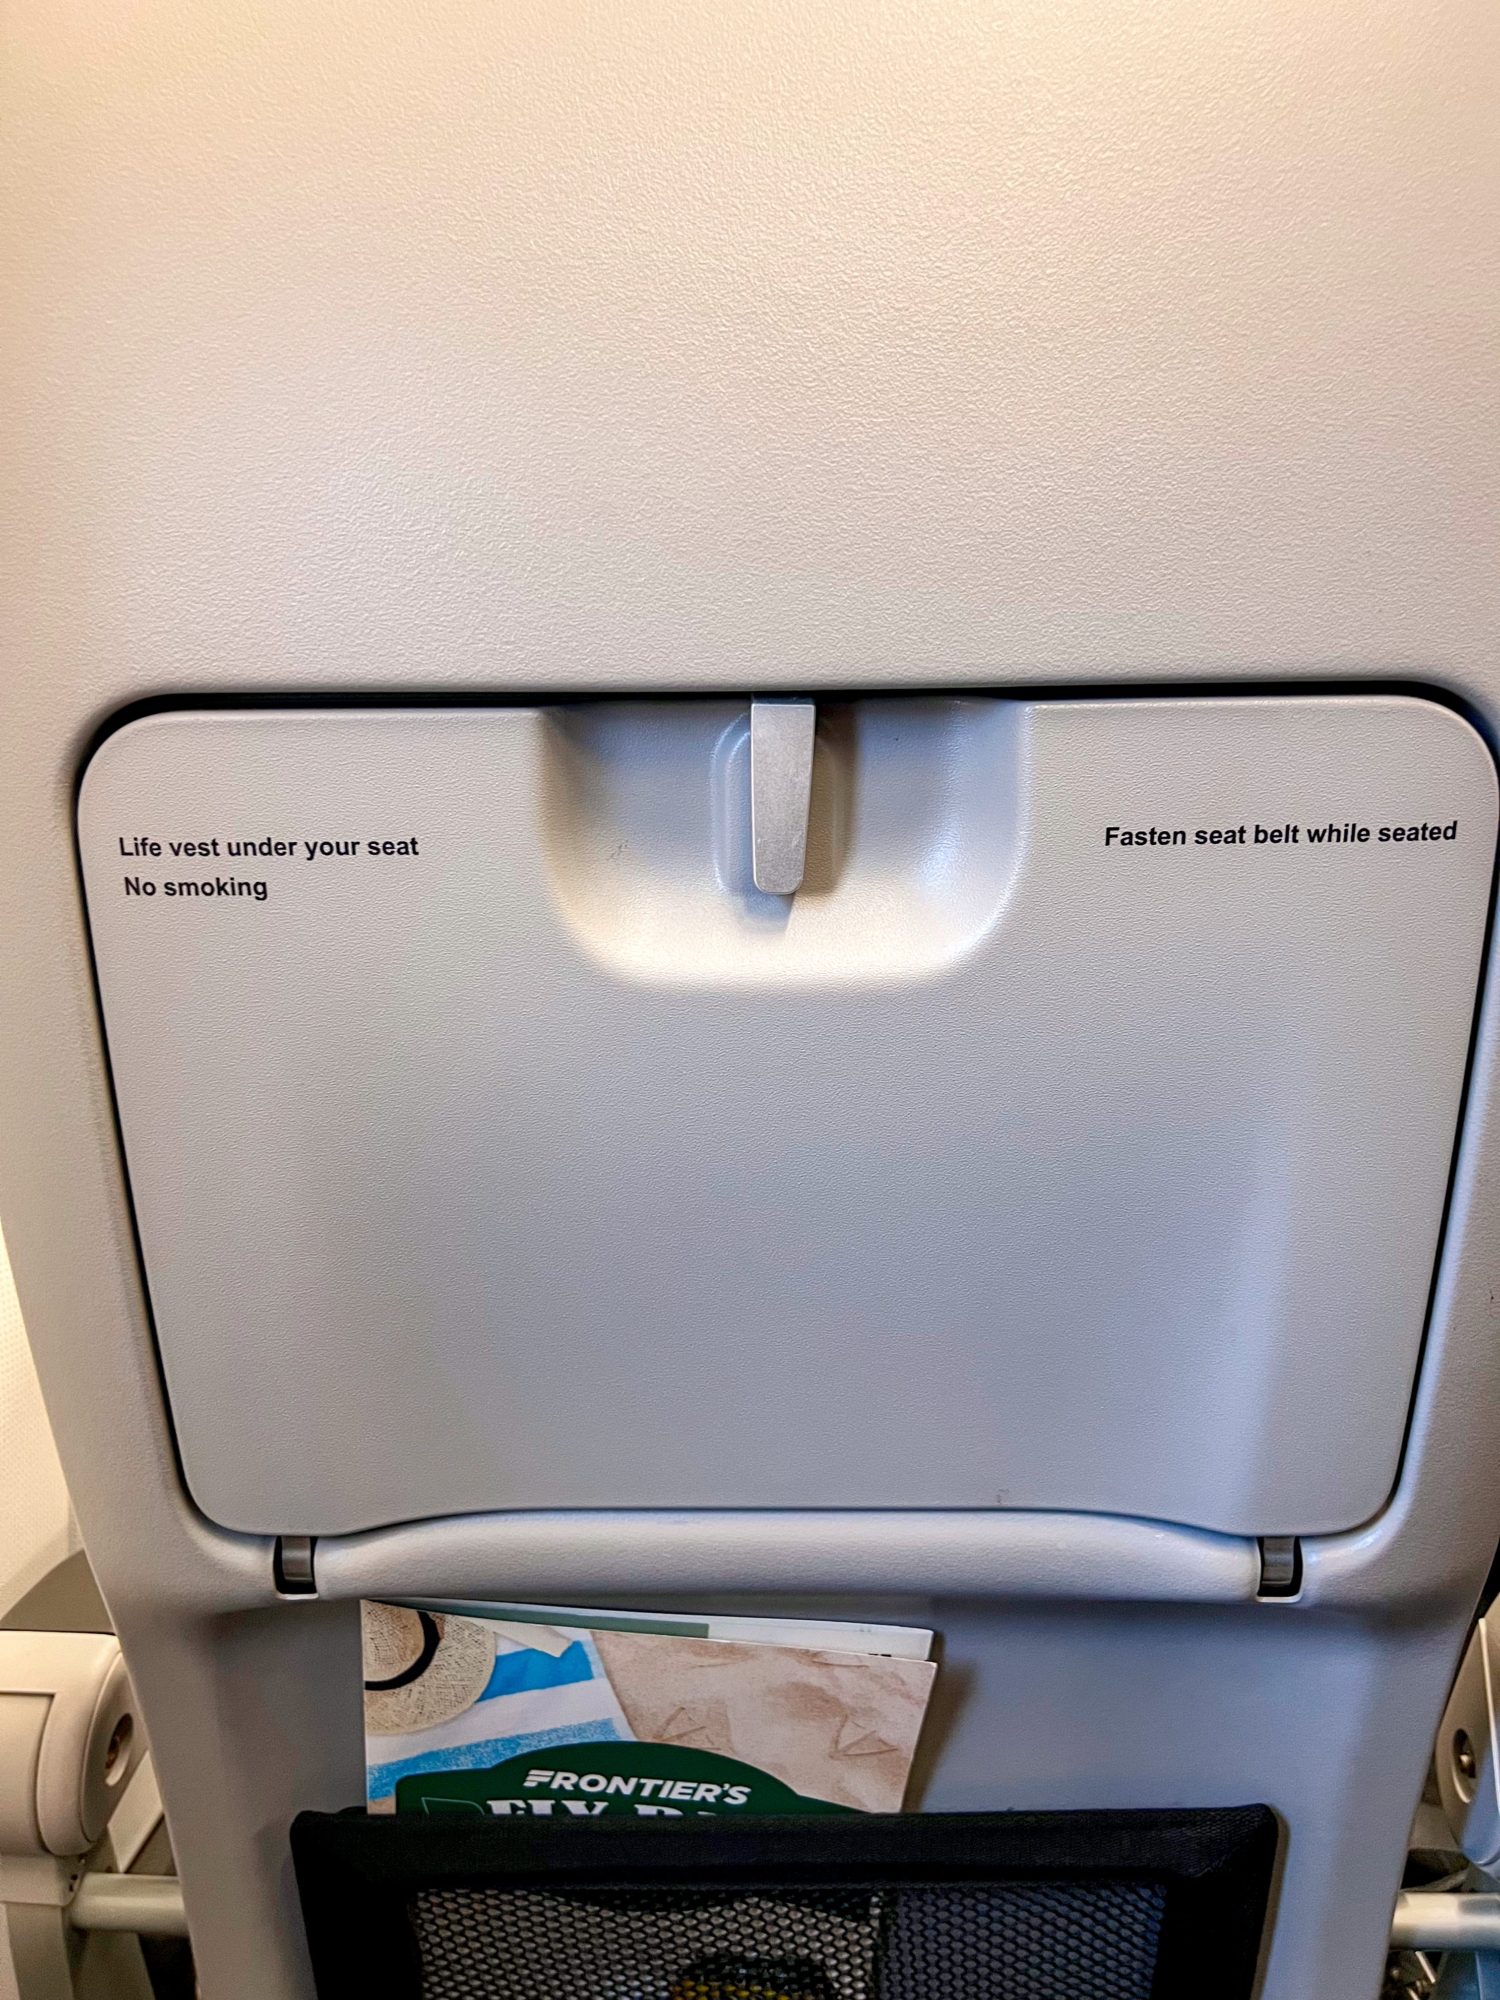 The Frontier tray table and menu card